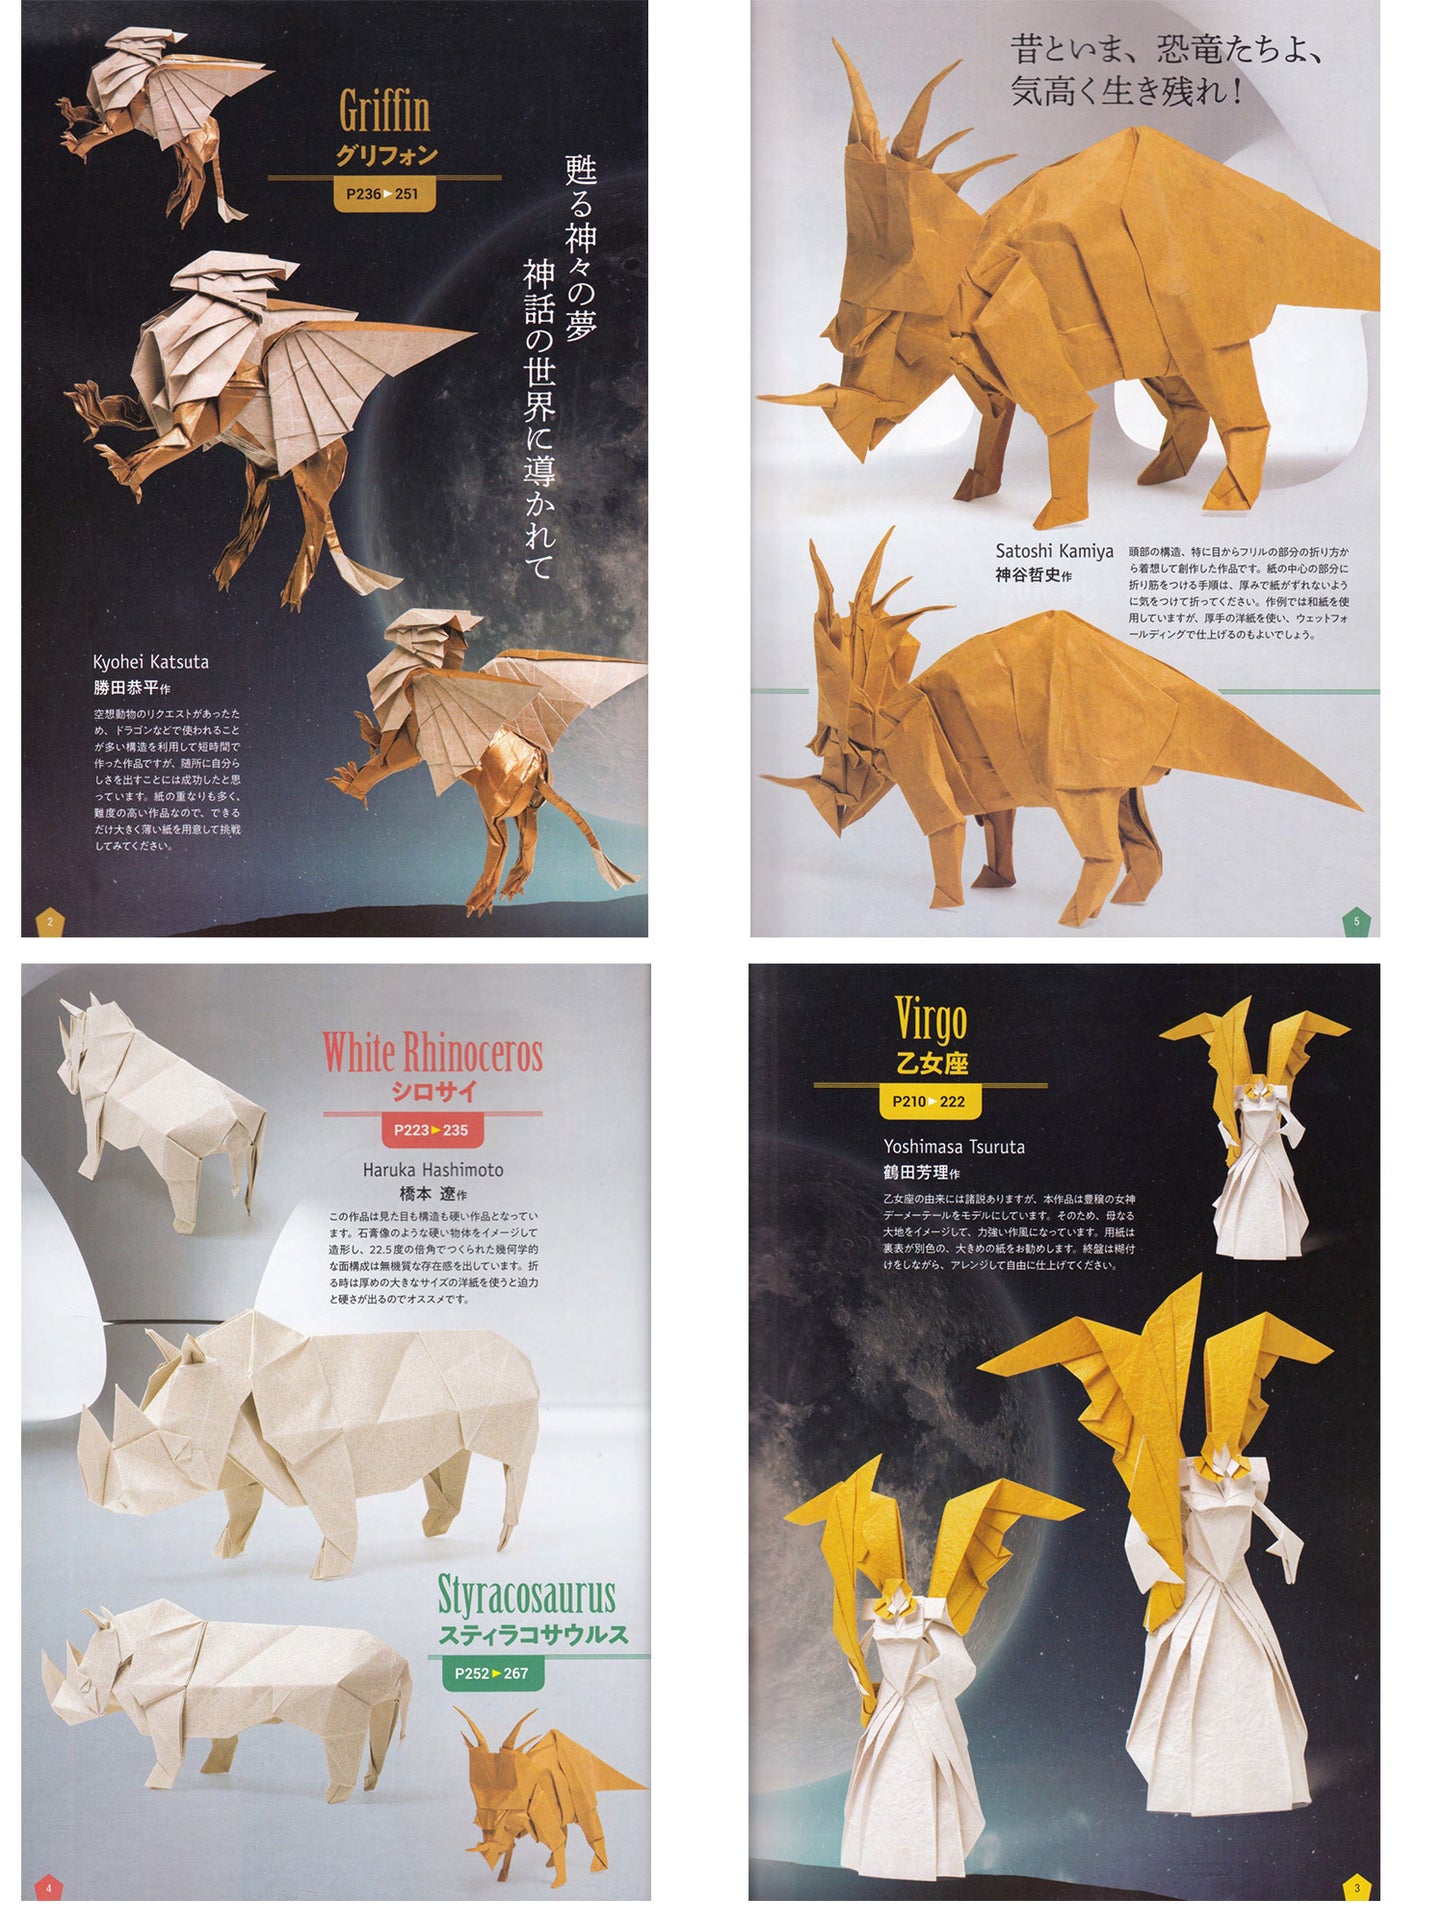 new generation of origami 至高折纸 新世代